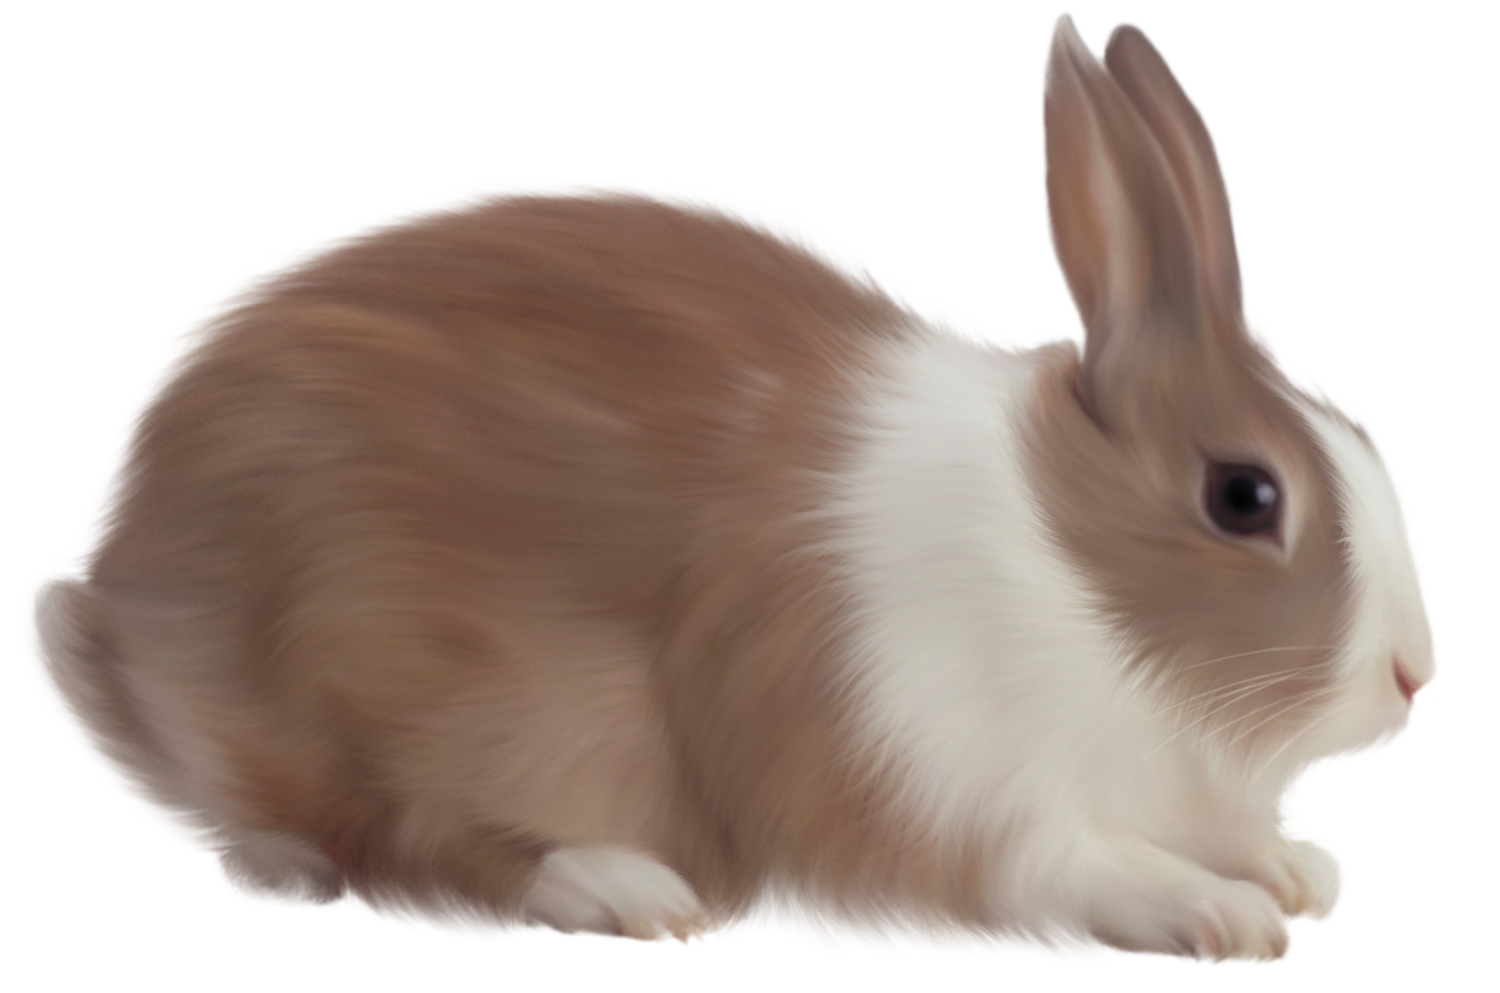 Png images free pictures. Ears clipart white rabbit